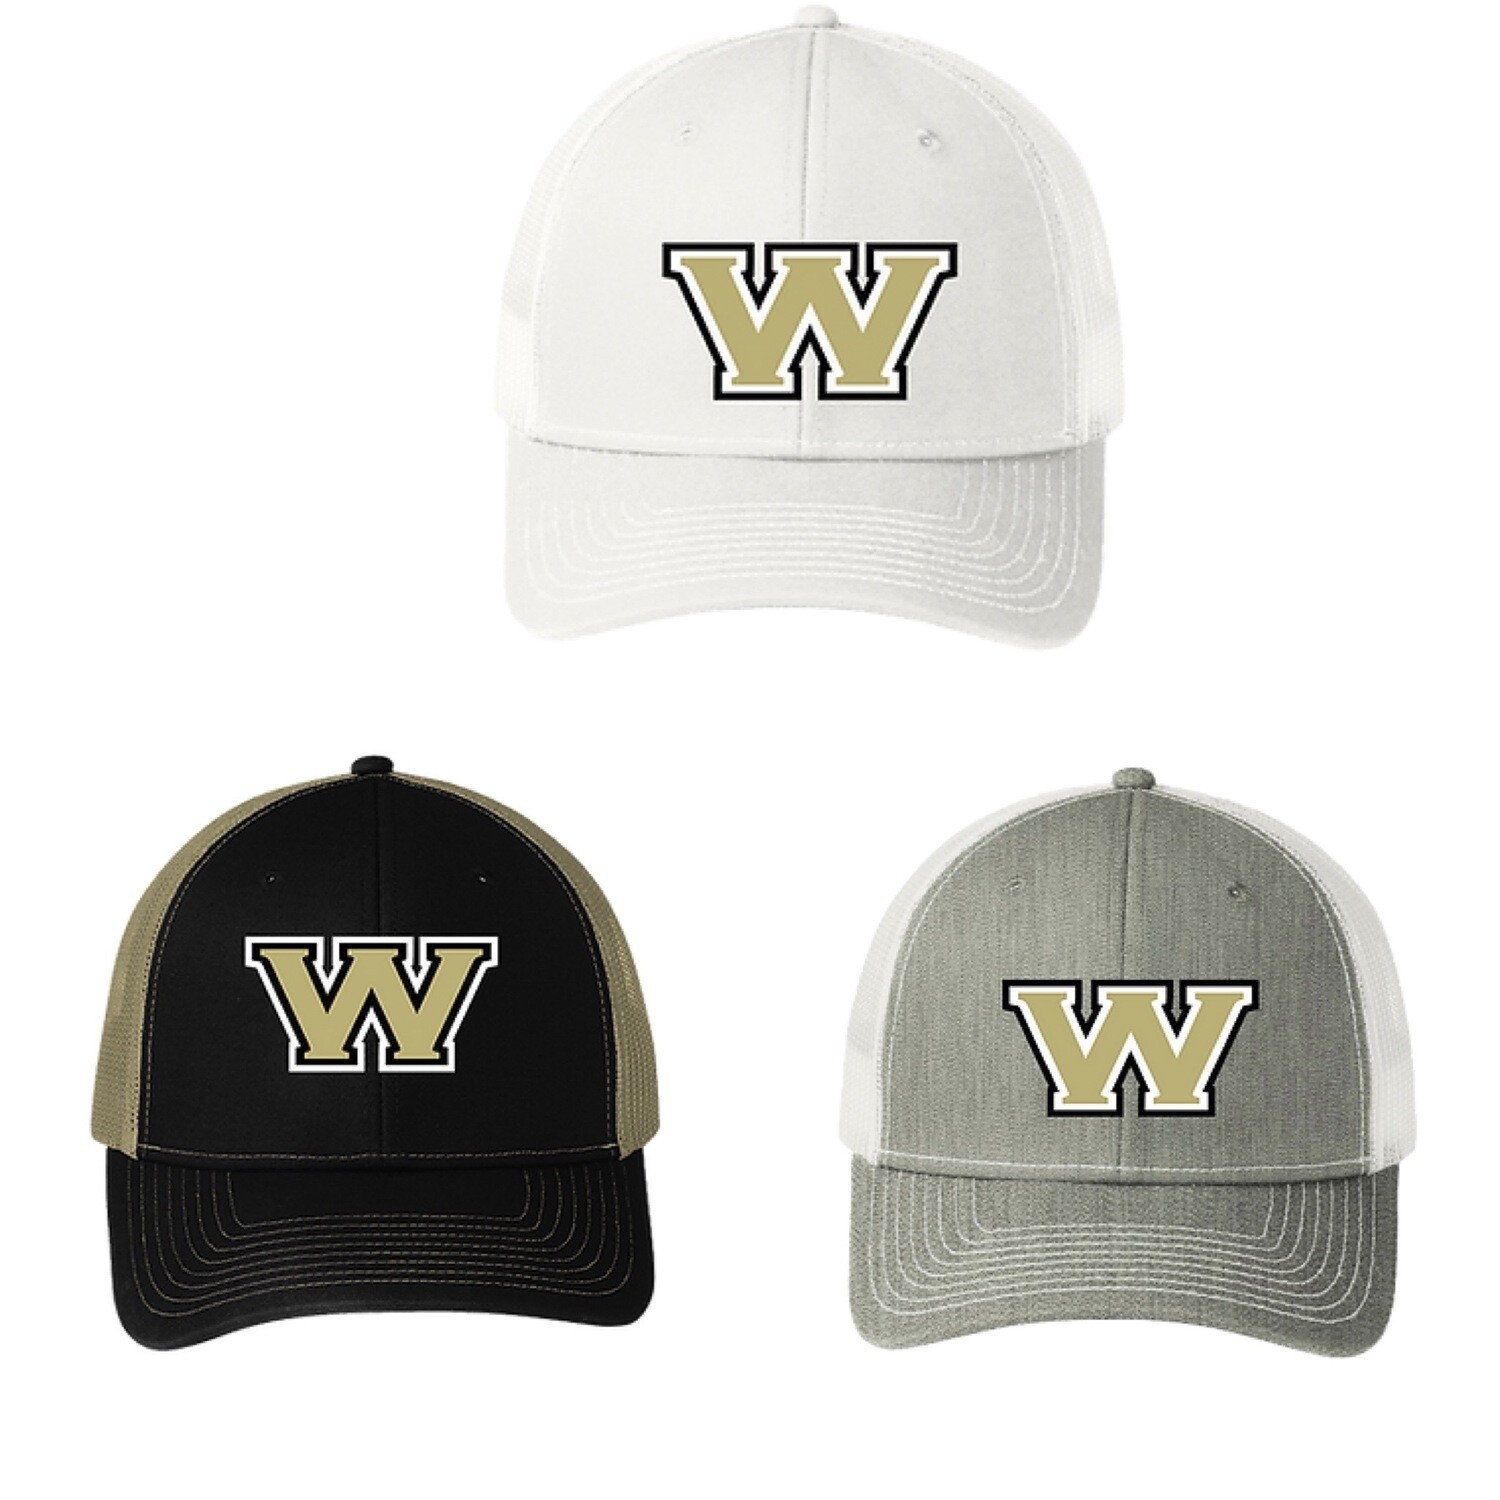 Snapback Embroidered Hat "W"